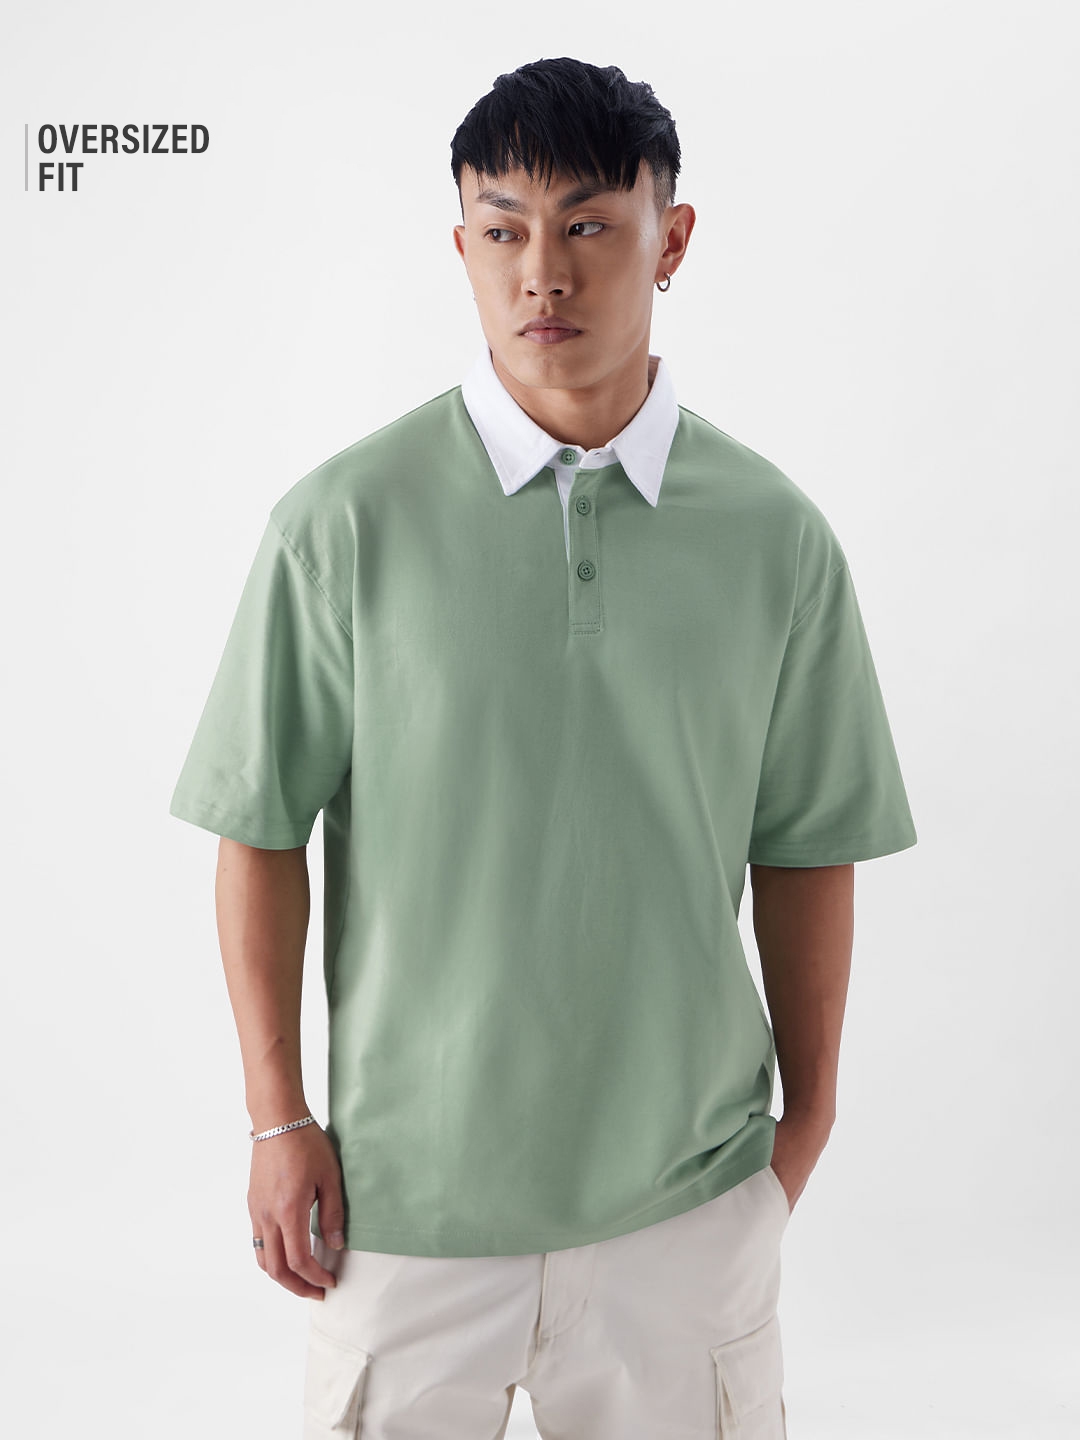 The Souled Store | Men's Solids: Jade Oversized Polo T-Shirt